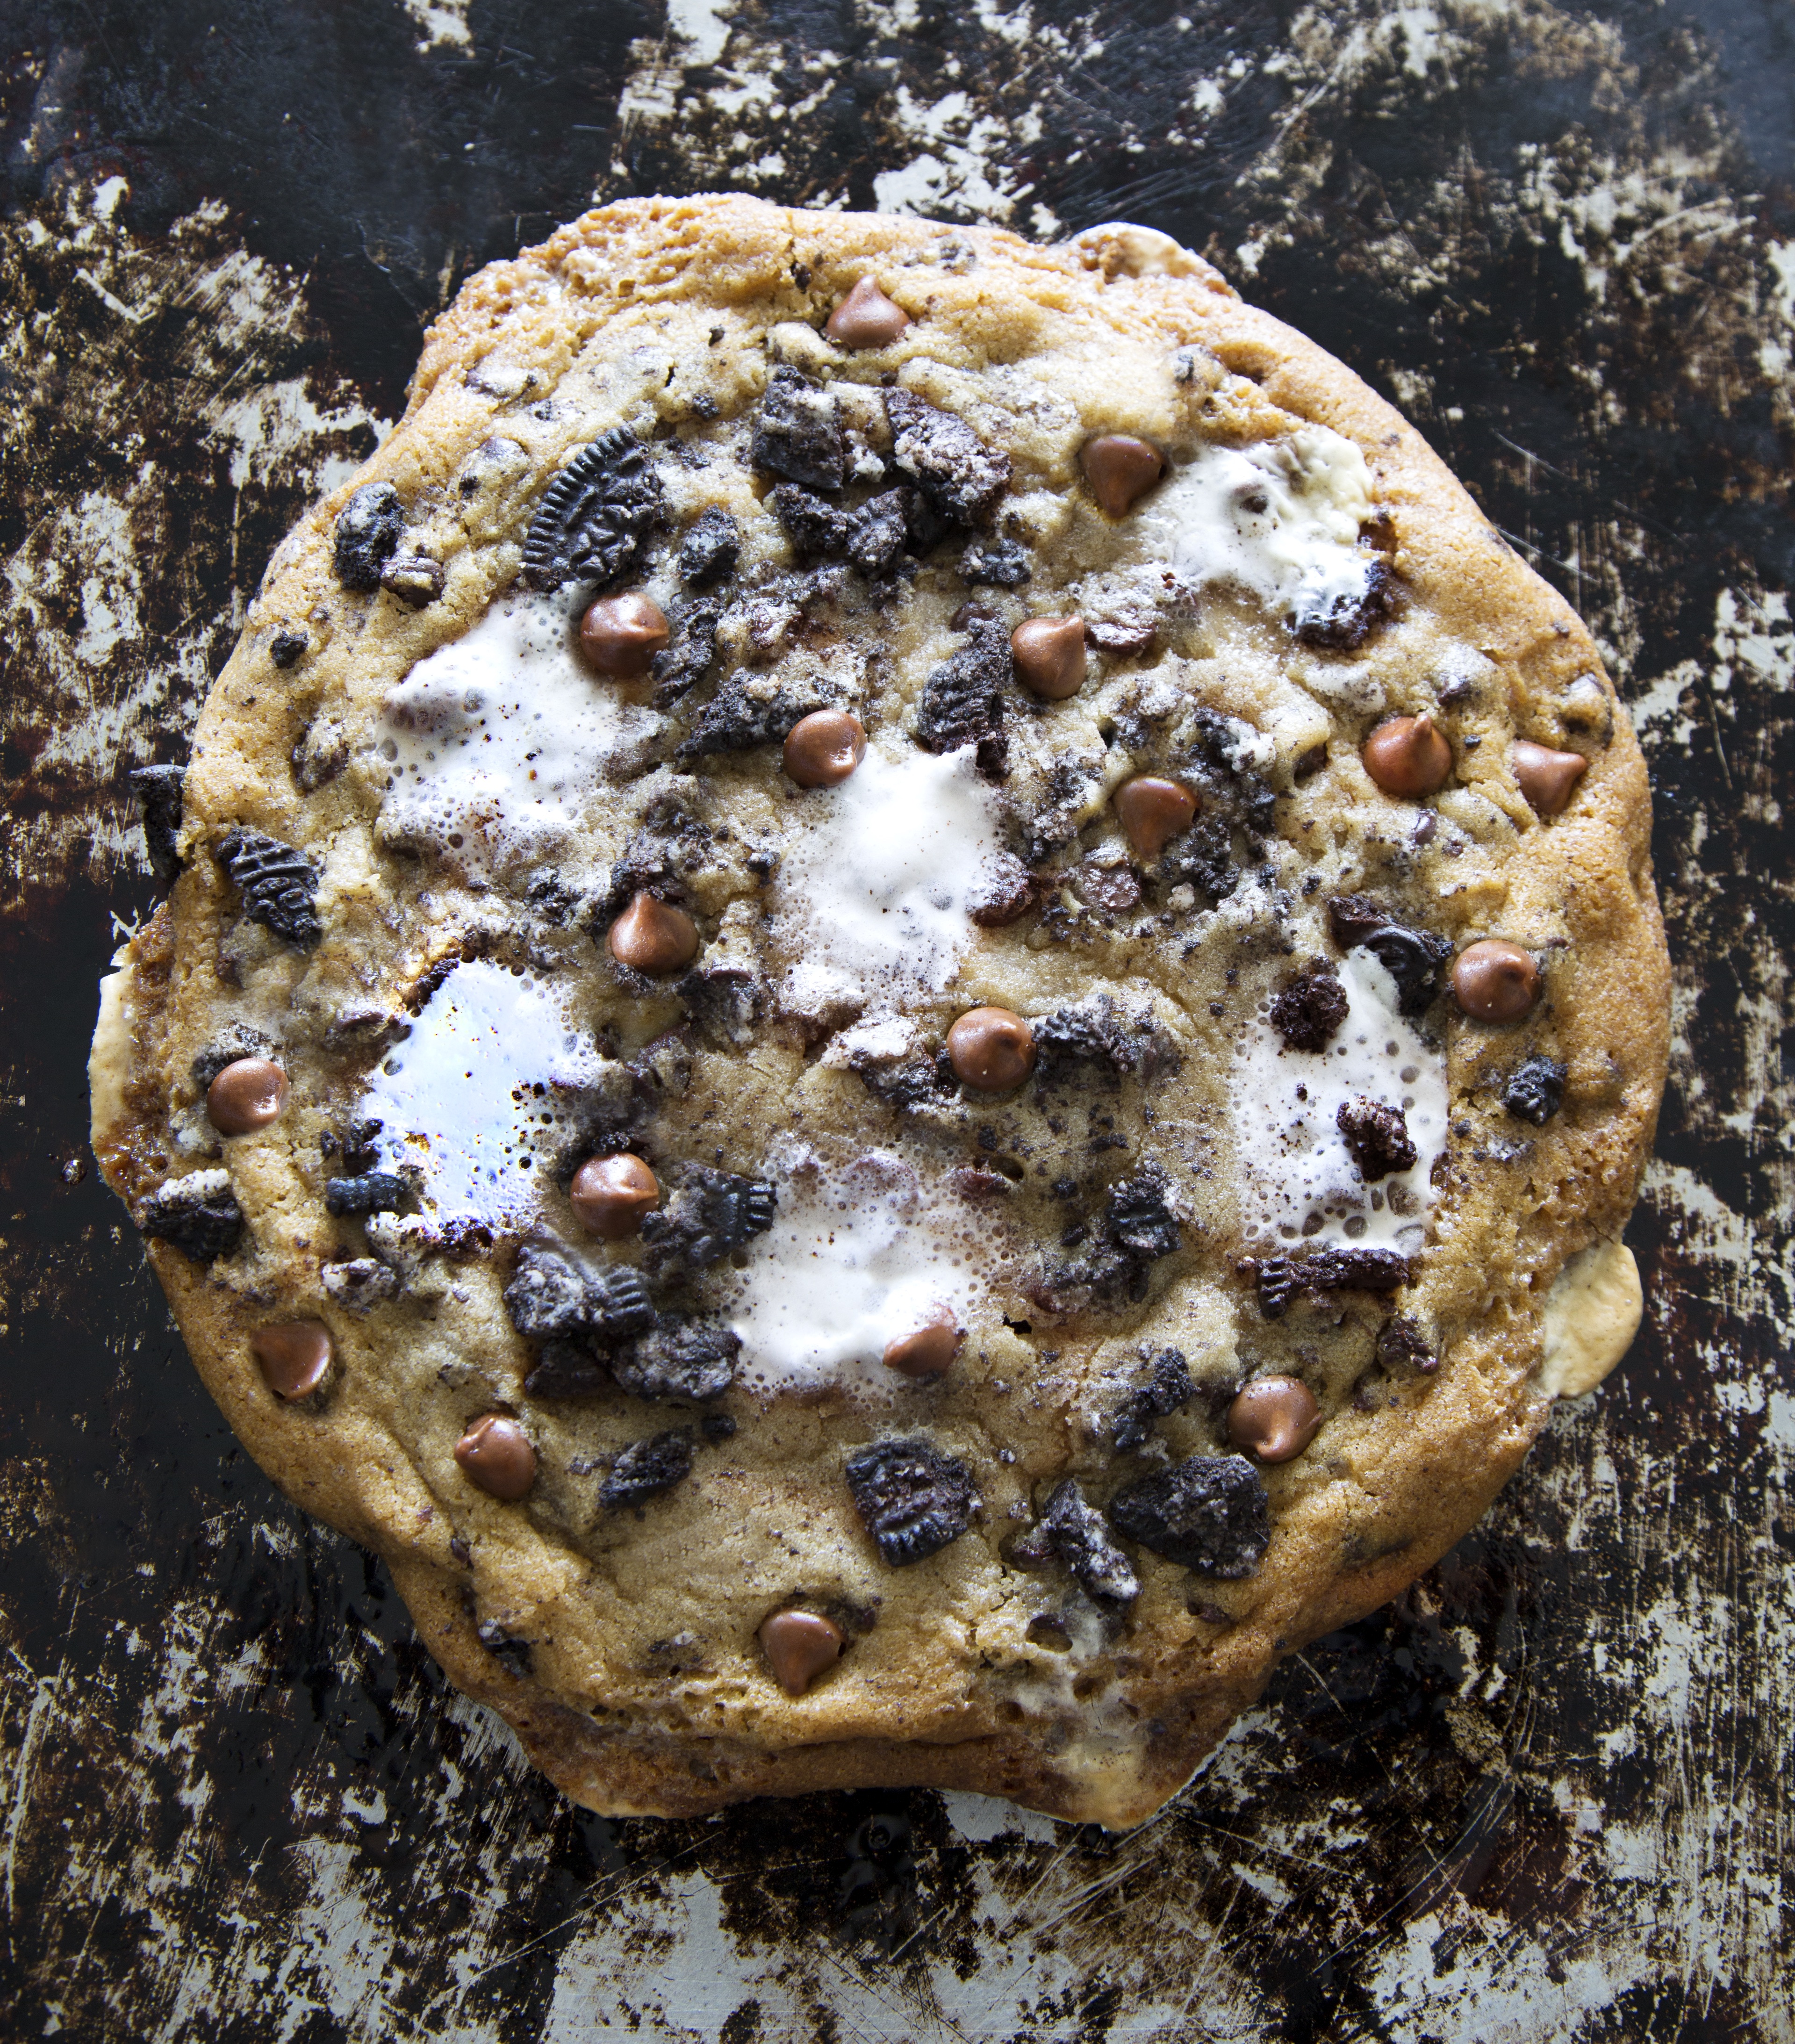 Chocolate Chip stuffed with Cookies and Cream _ Cookies and Cream stuffed with Marshmallow-REV copy